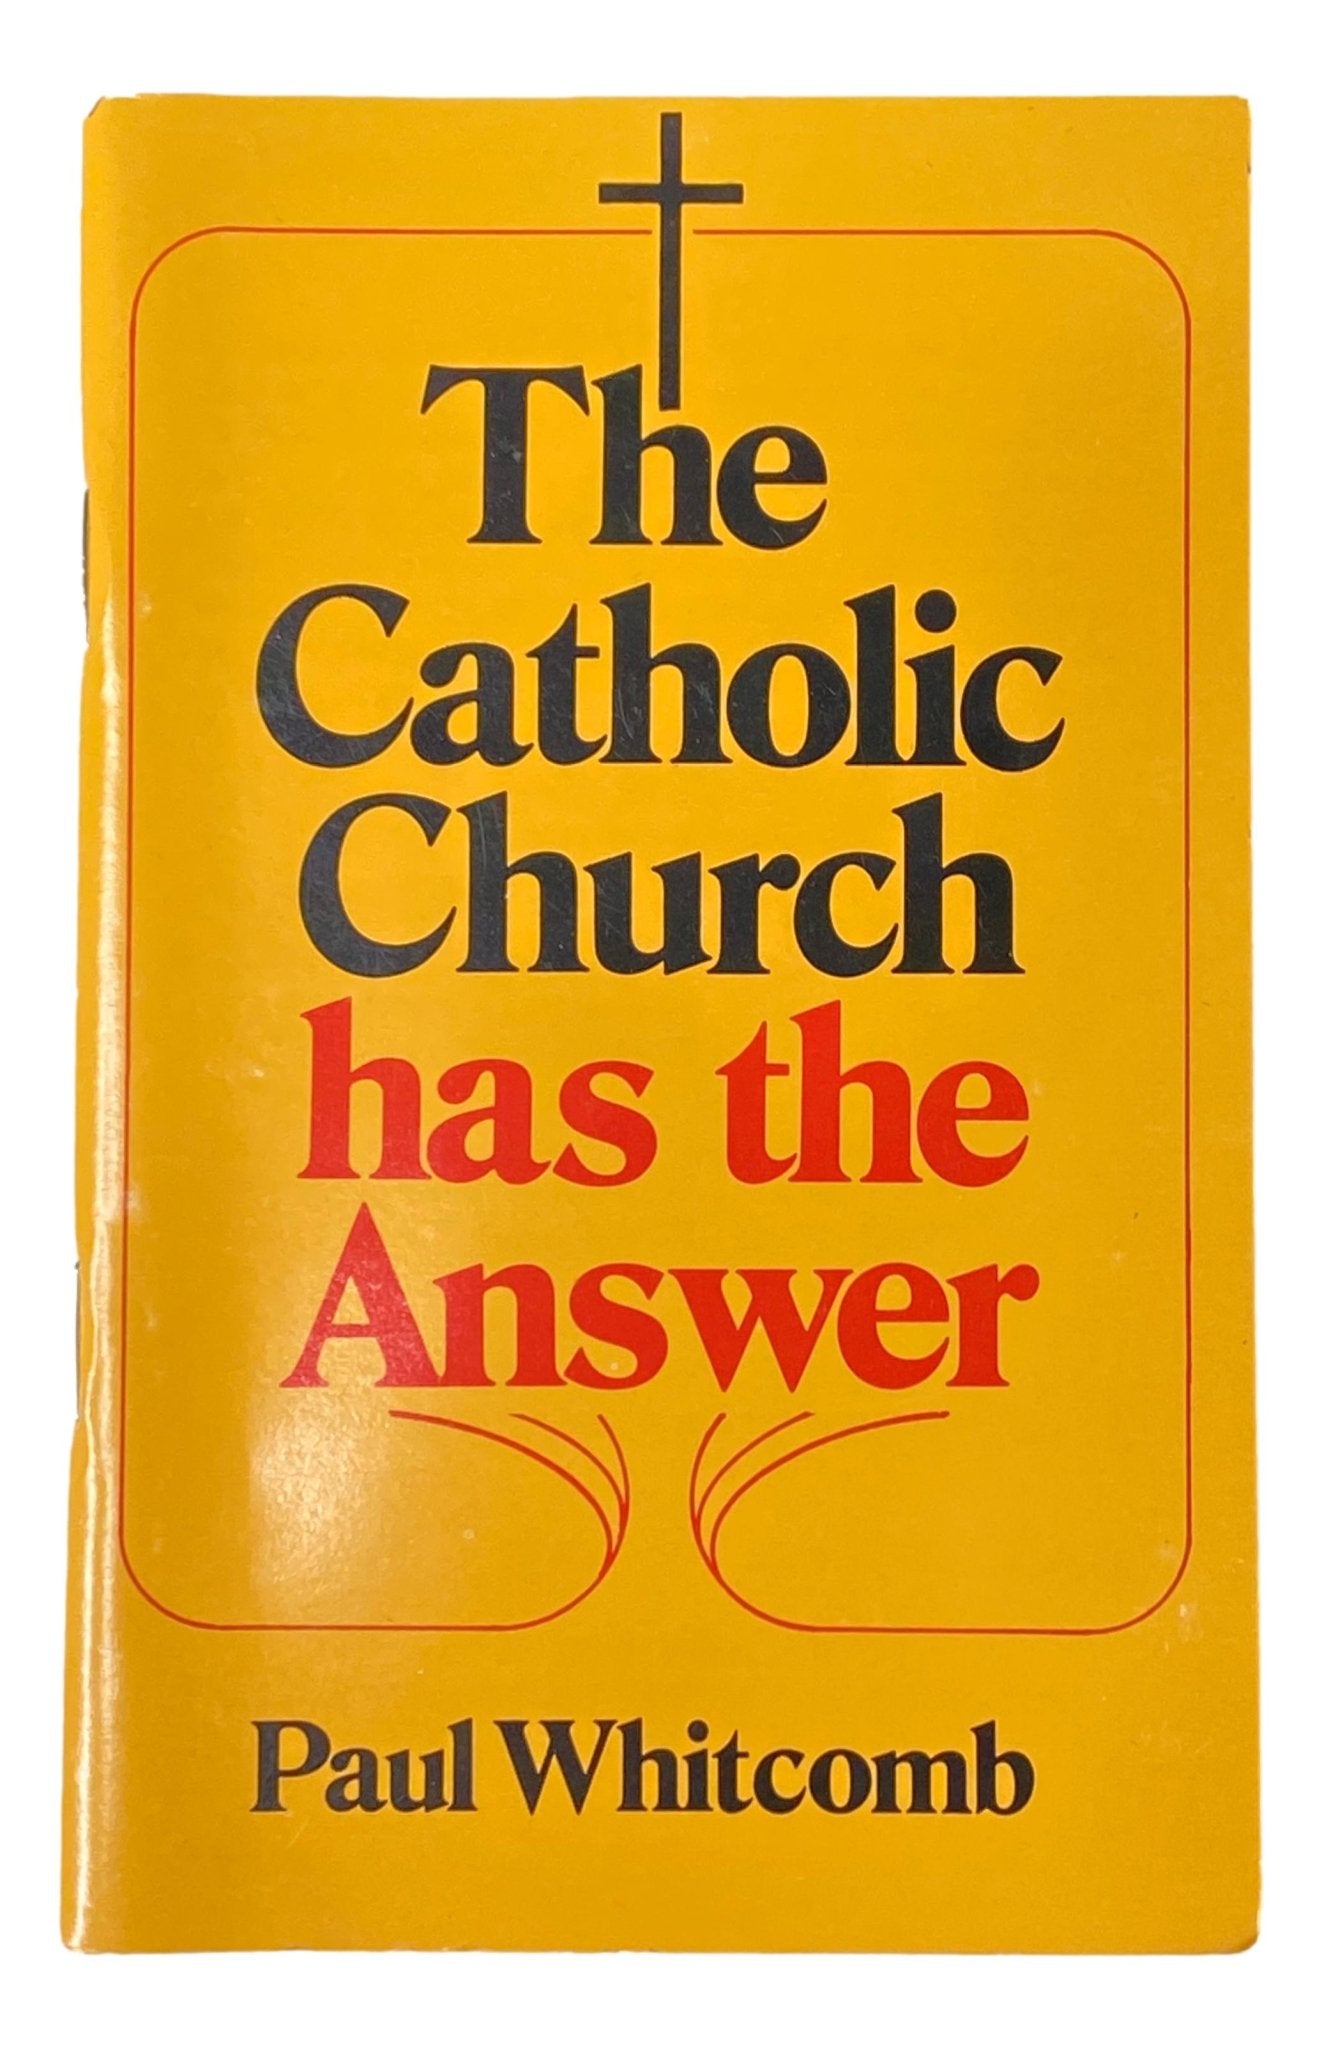 The Catholic Church Has the Answer Booklet by Paul Whitcomb 6 L x 3 3/4 W Inches - Ysleta Mission Gift Shop- VOTED 2022 El Paso's Best Gift Shop